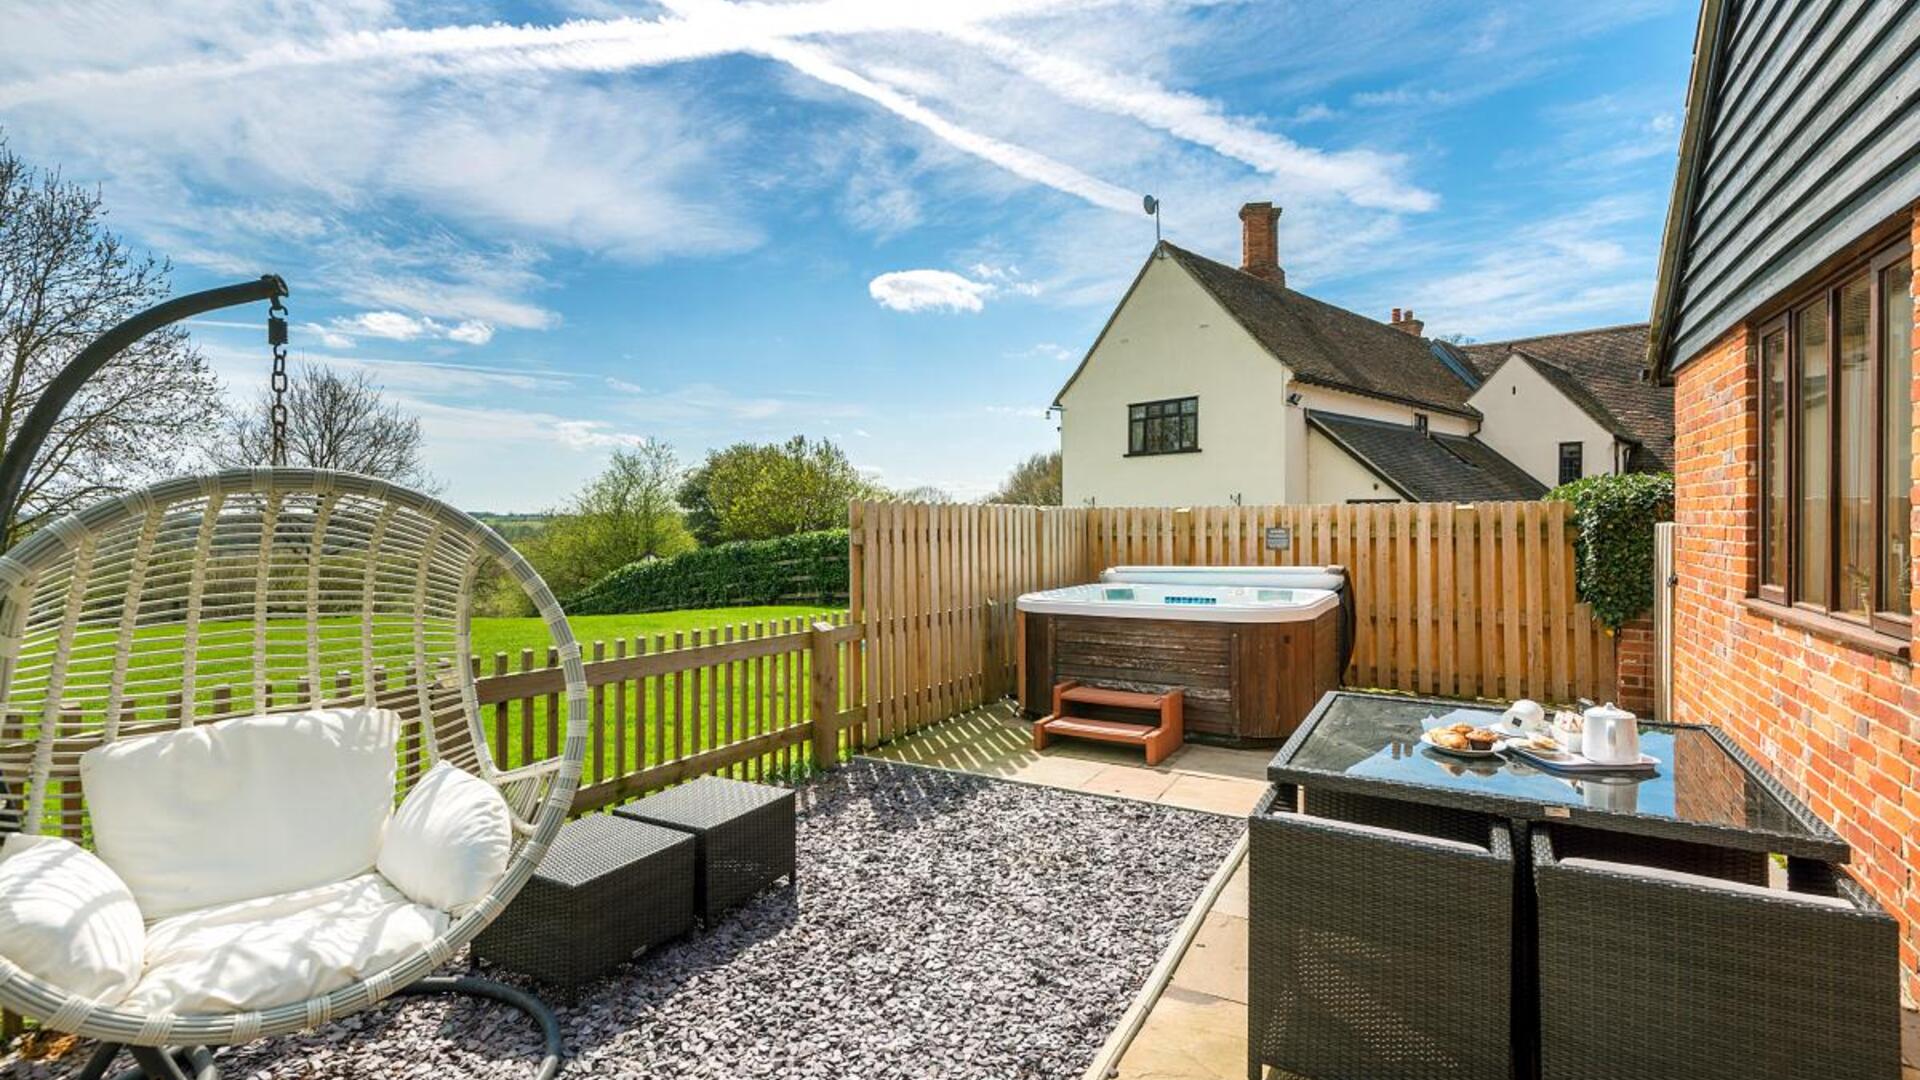 3 bedroom child friendly cottage Suffolk - SBCo